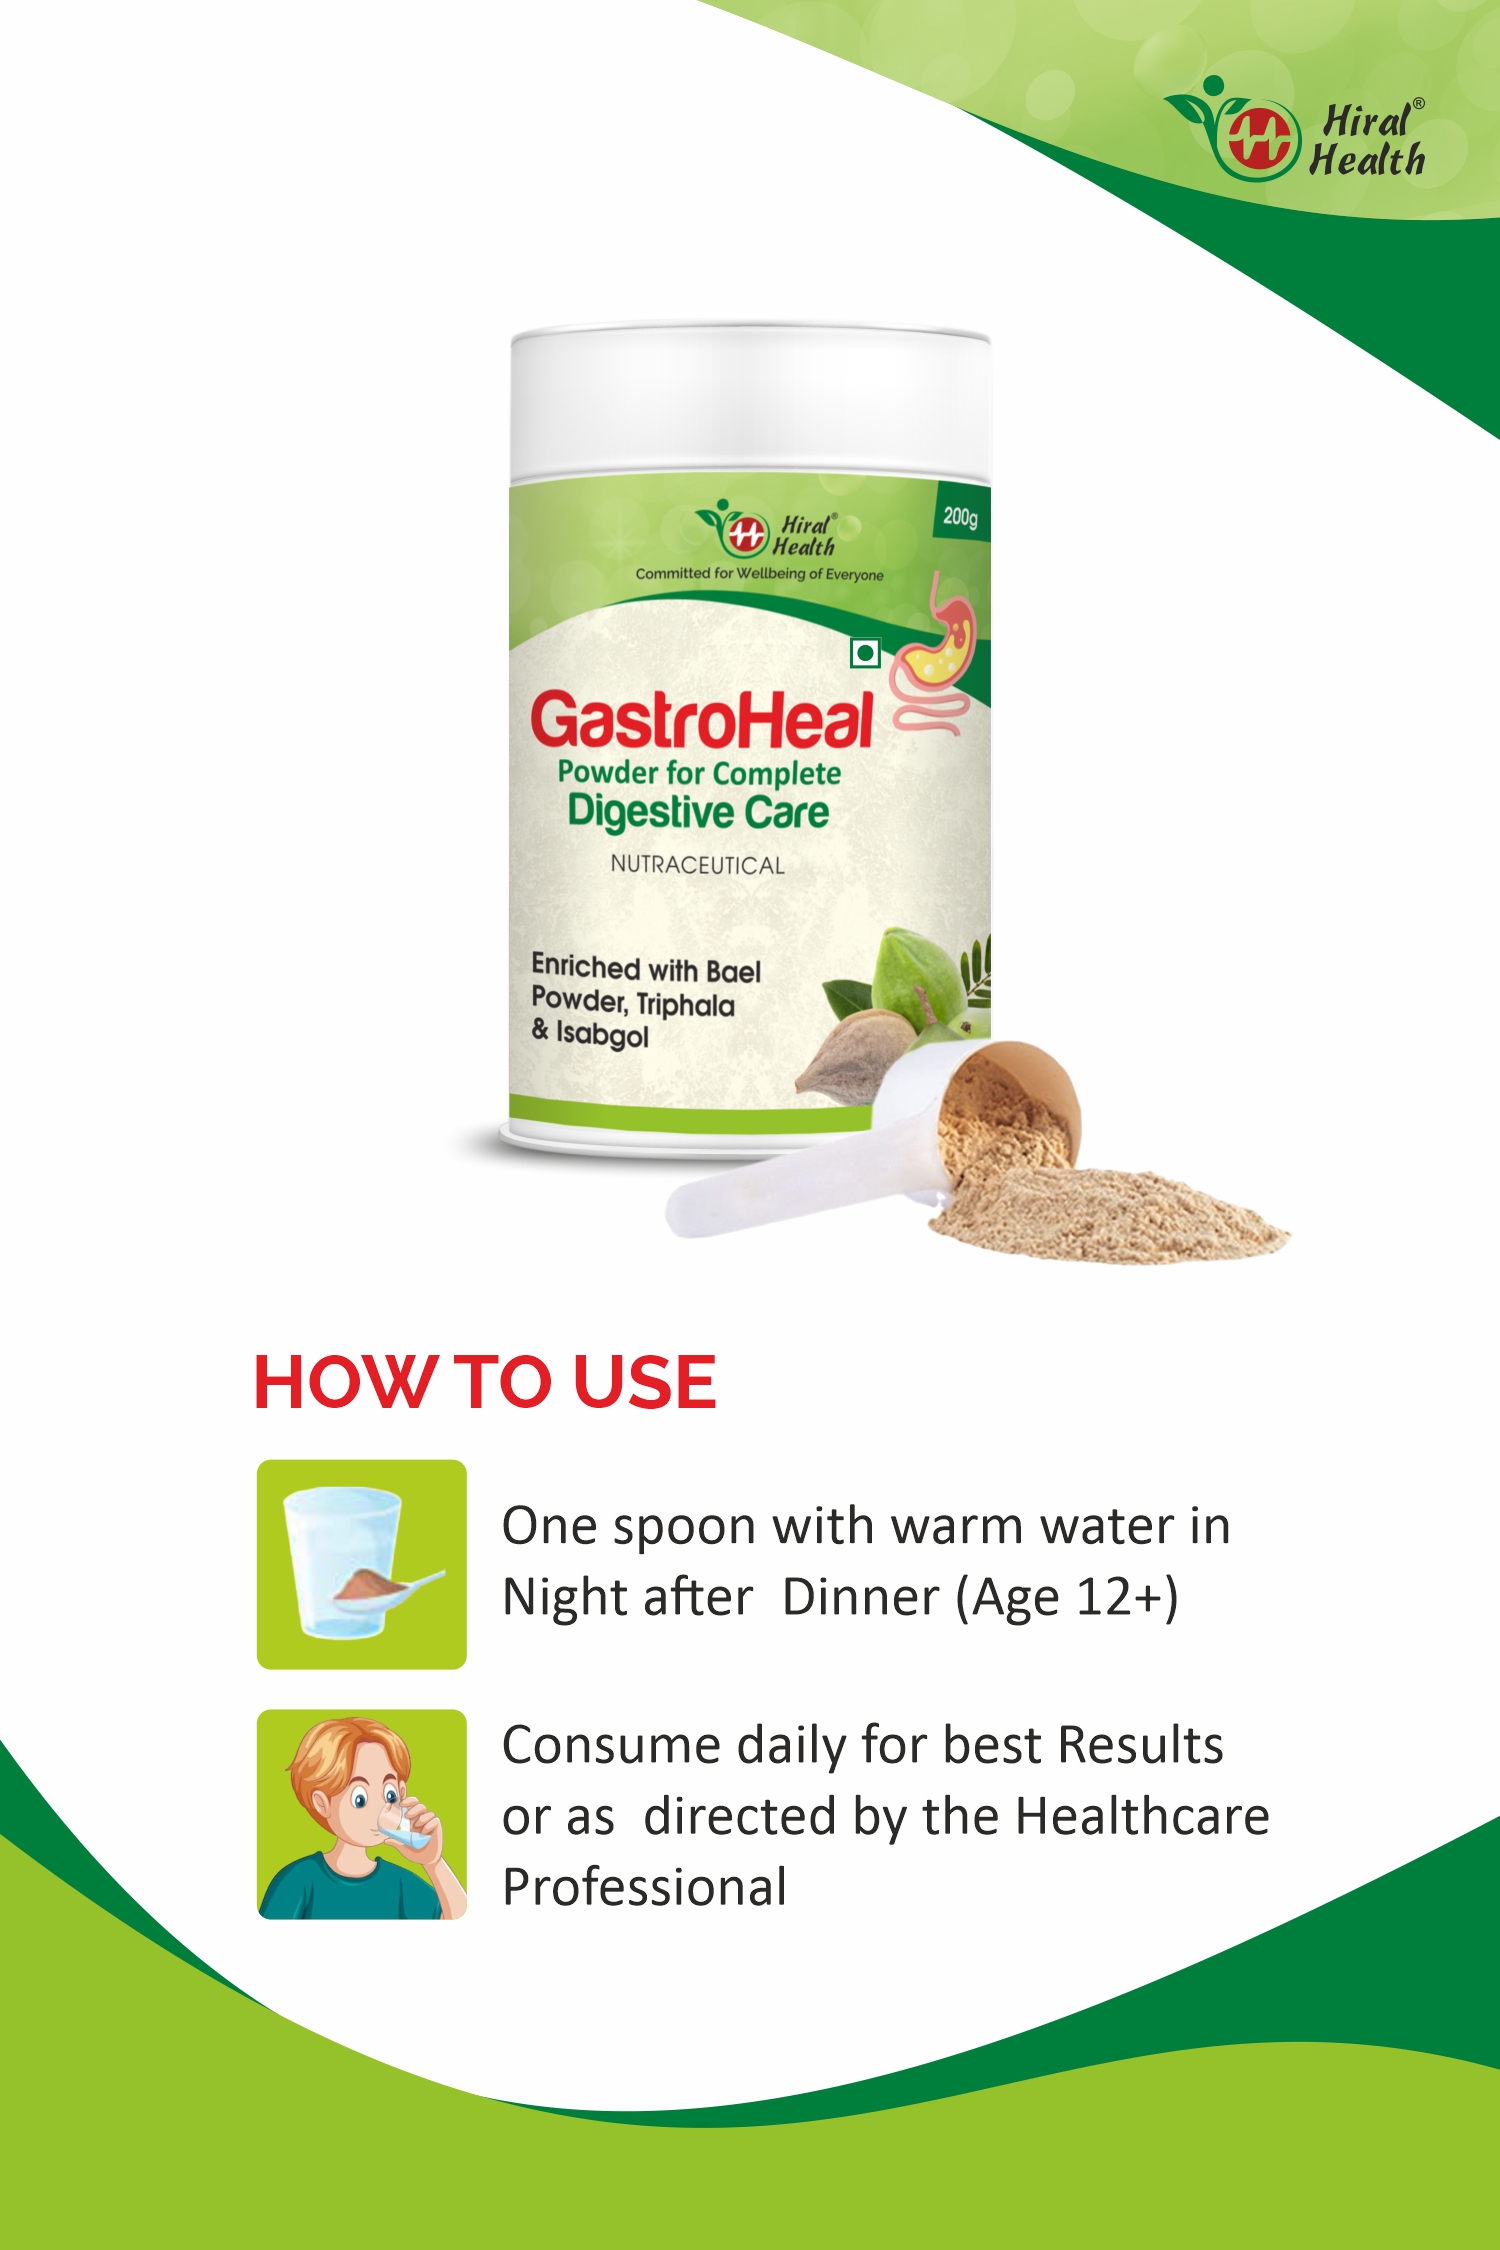 how to use gastroheal powder